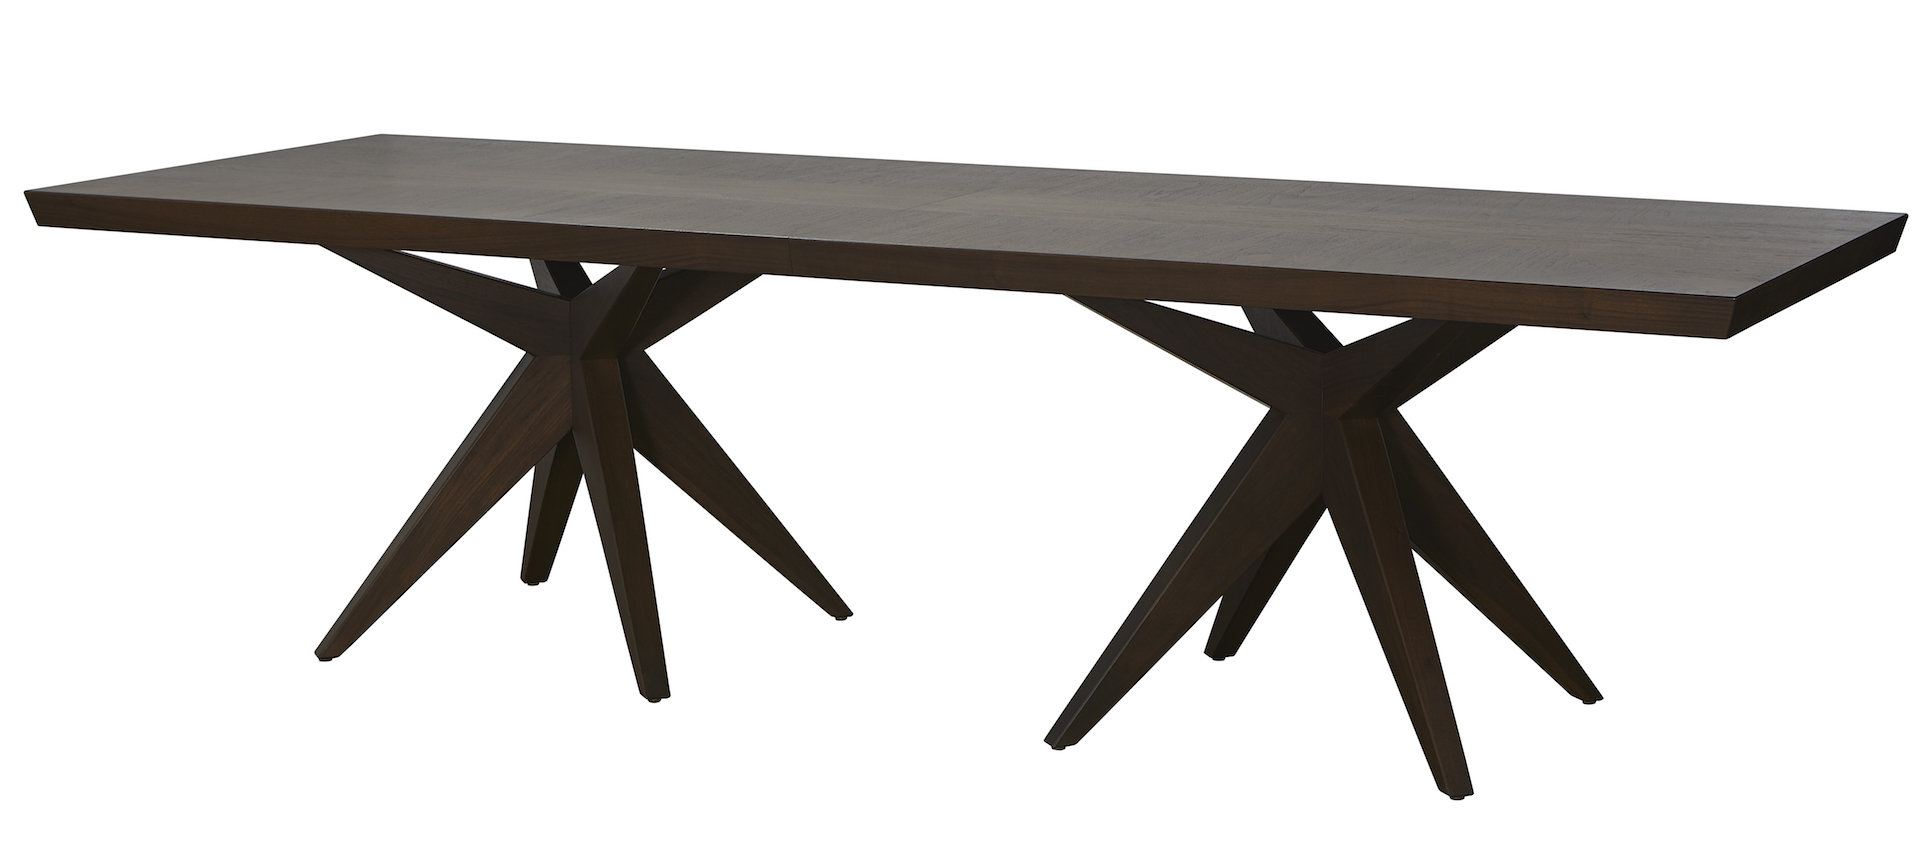 Double Bonfire Dining Table Sustainable Hardwood Handcrafted made in maine sherwood hamill